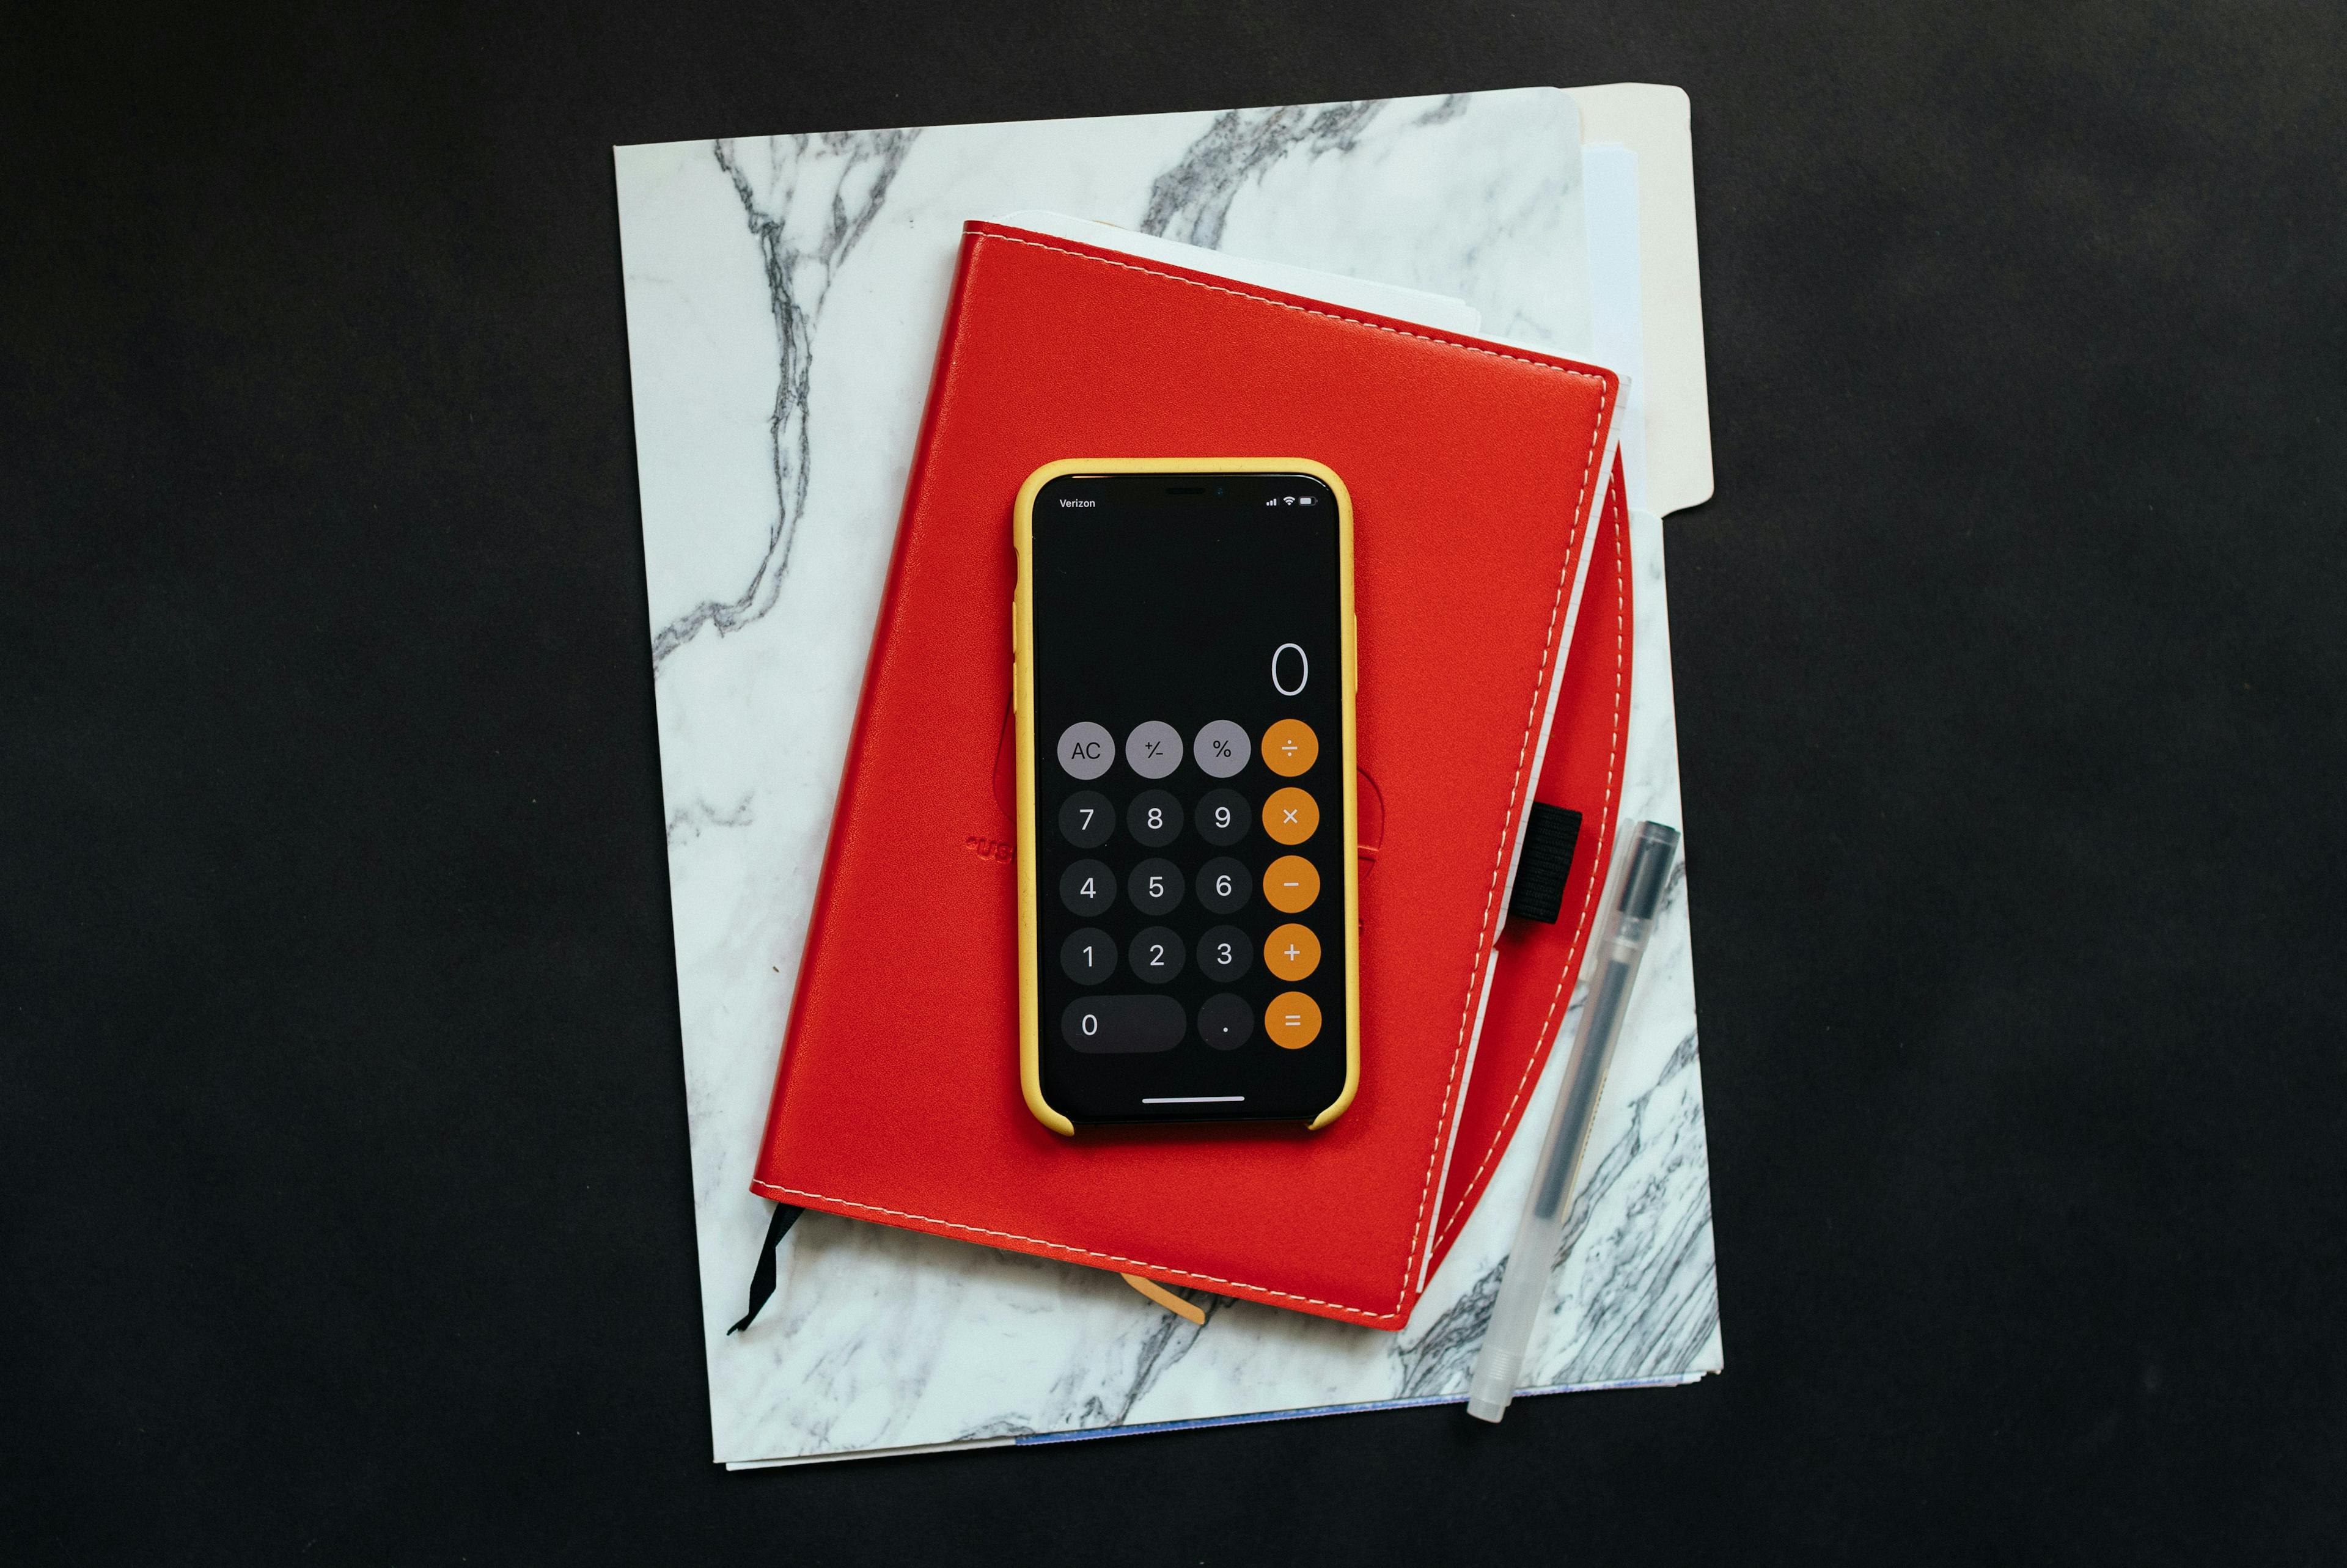 Black Apple iPhone on red flip case with the calculator app open